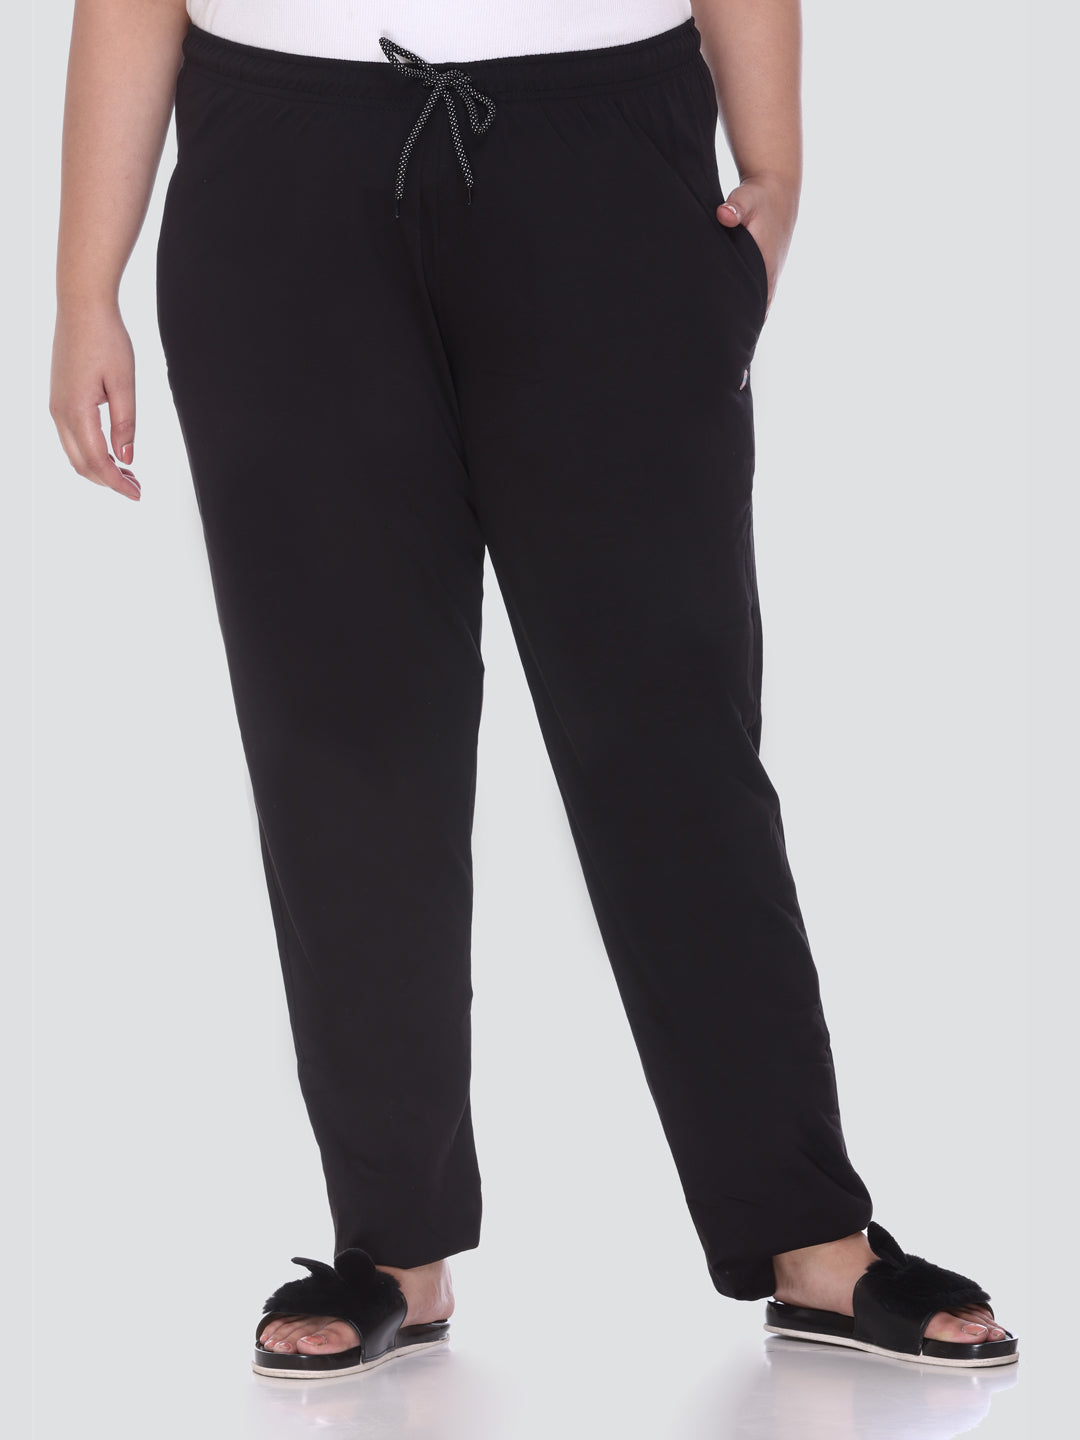 Buy Cotton Black Track pants for Women online in India - Cupidclothings –  Cupid Clothings